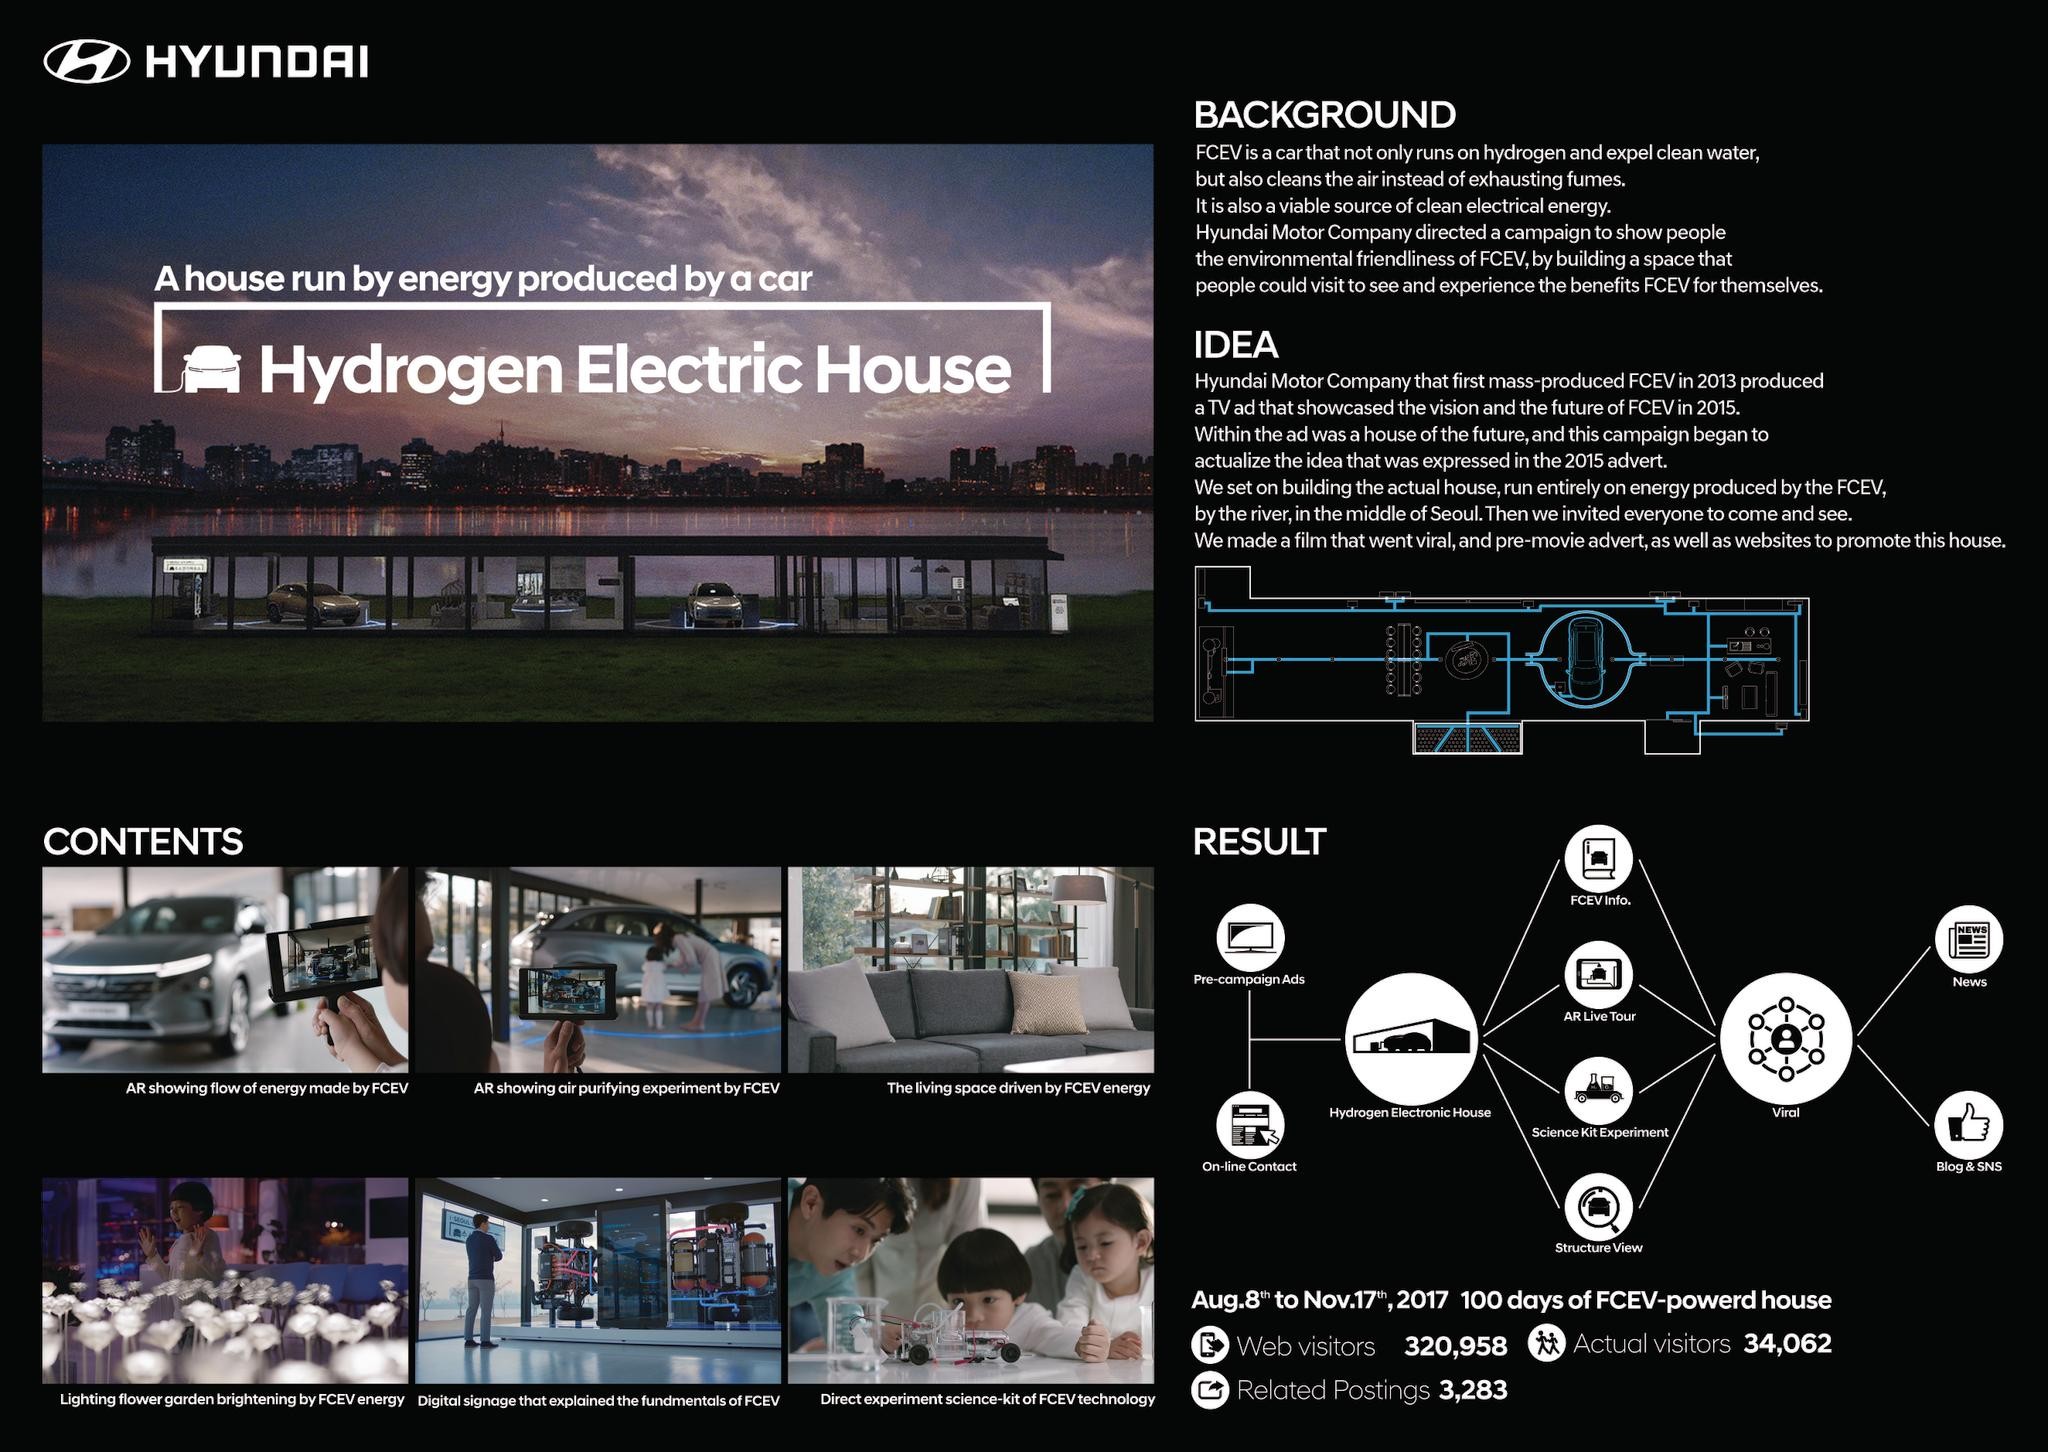 Hydrogen Electric House